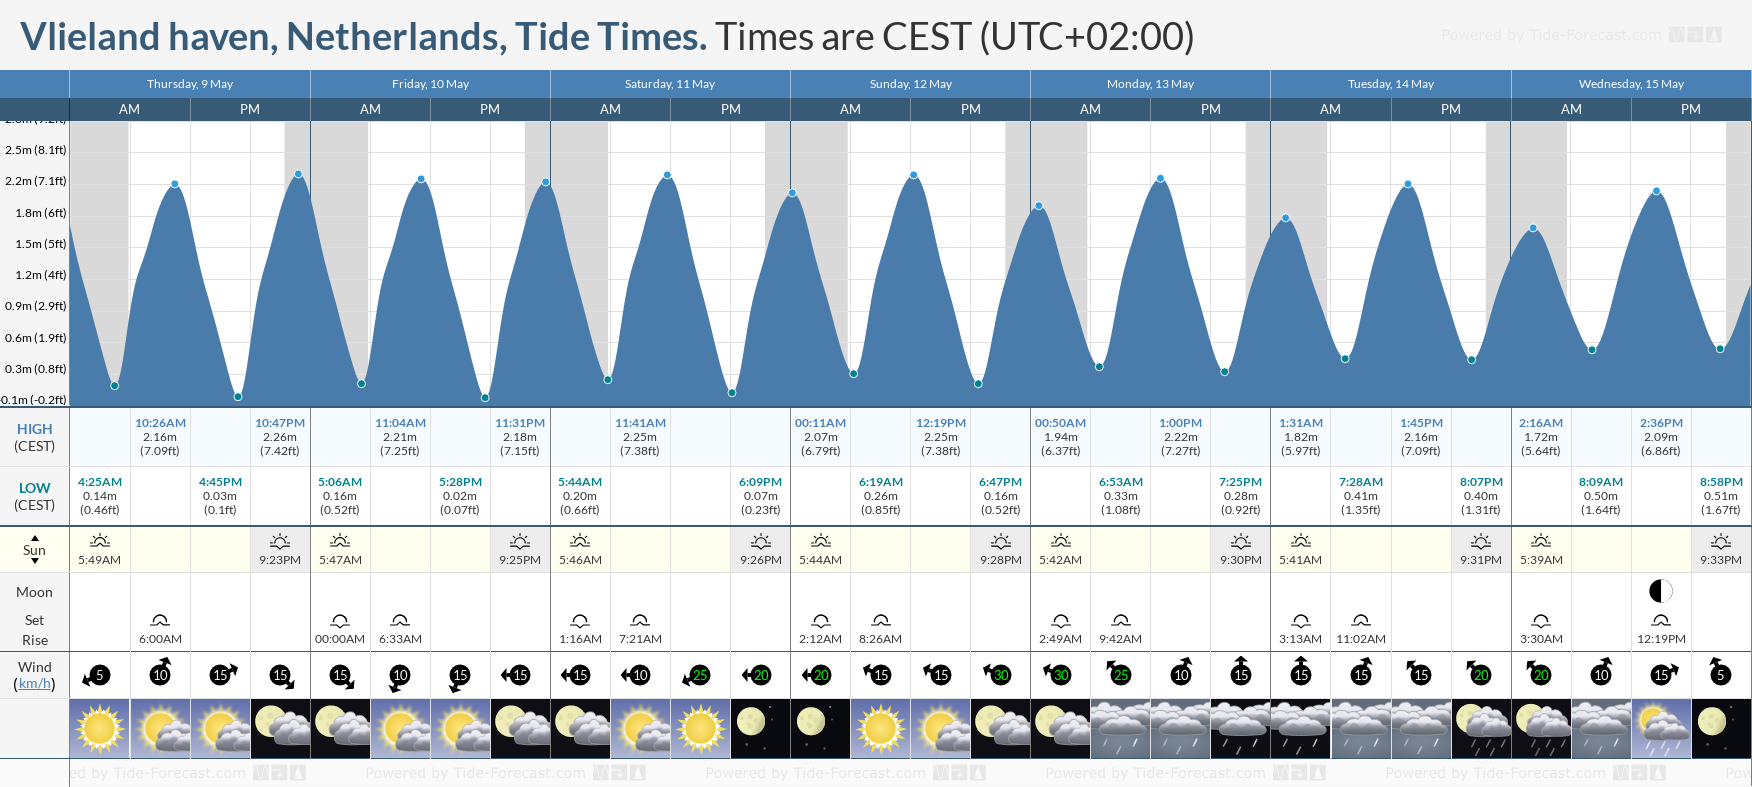 Vlieland haven, Netherlands Tide Chart including high and low tide tide times for the next 7 days